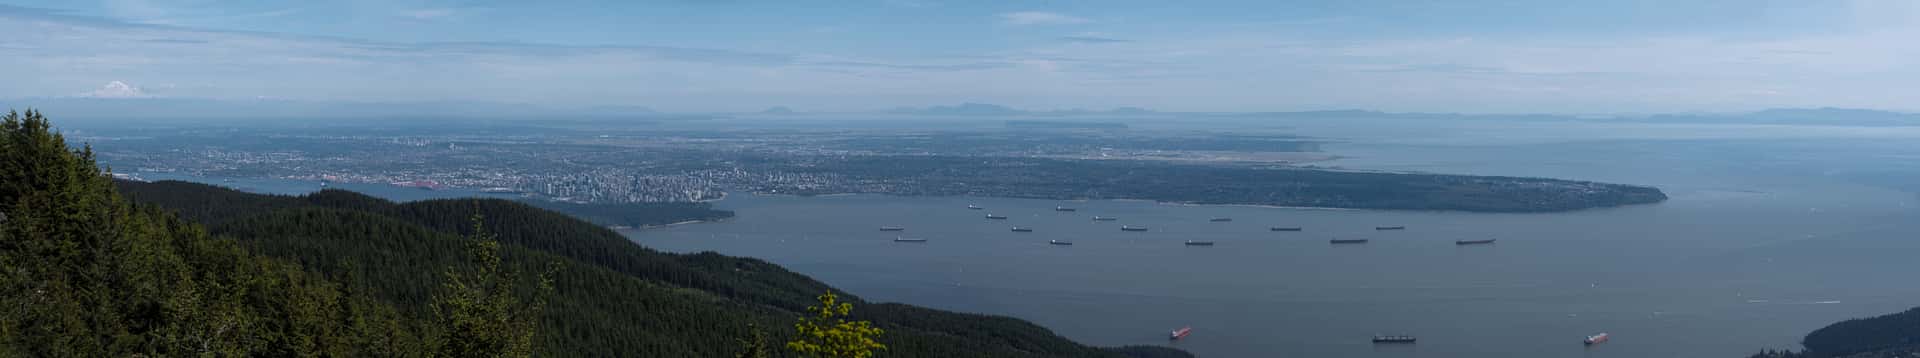 view of Vancouver and Mt. Baker from Eagle Bluffs